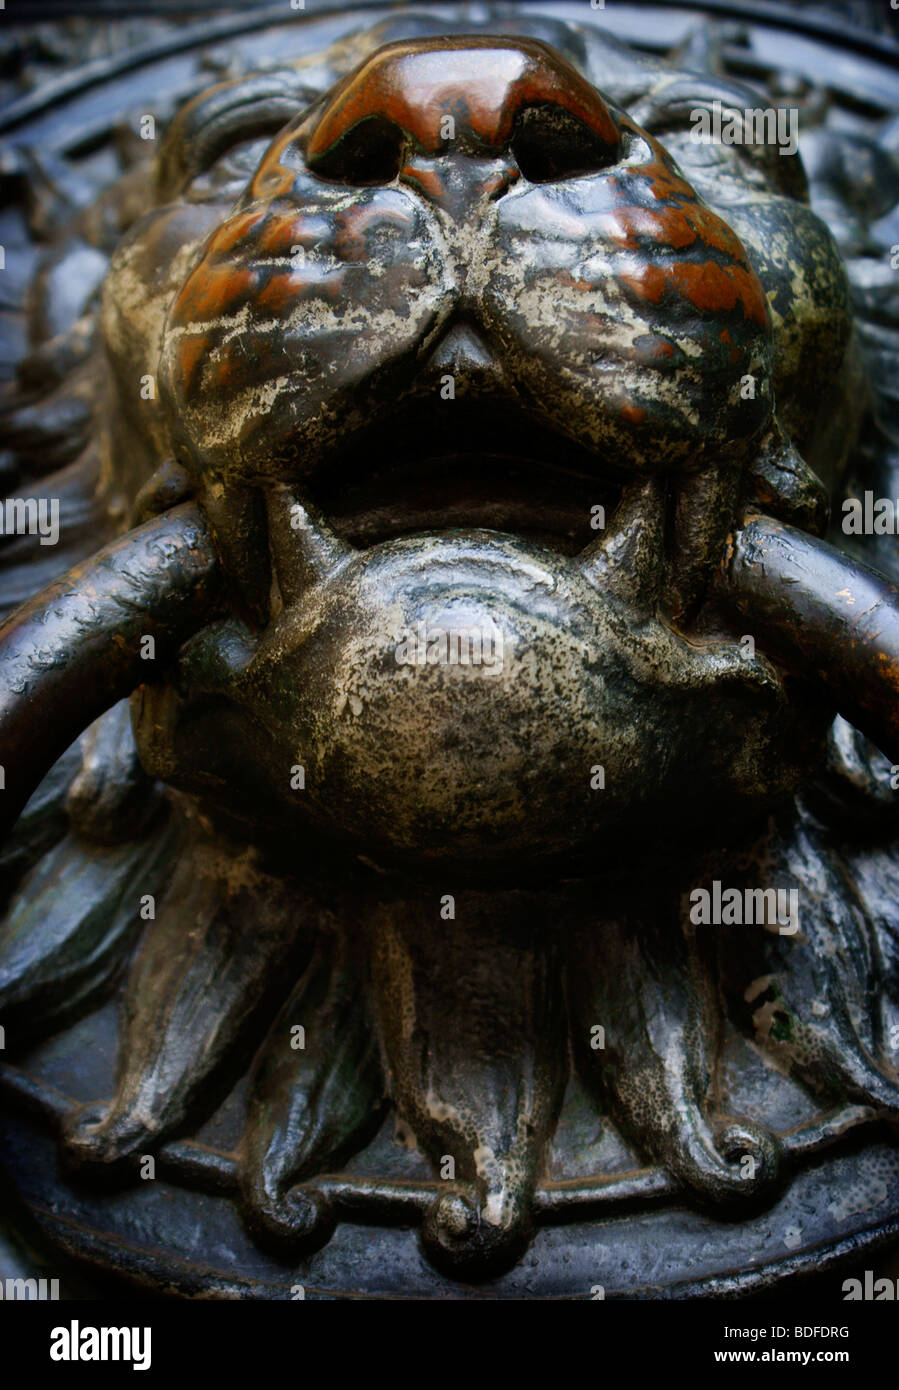 Köln - Kölner Dom / Cologne Gothic Cathedral in Germany. Close-up of lion head door / portal knocker. Stock Photo